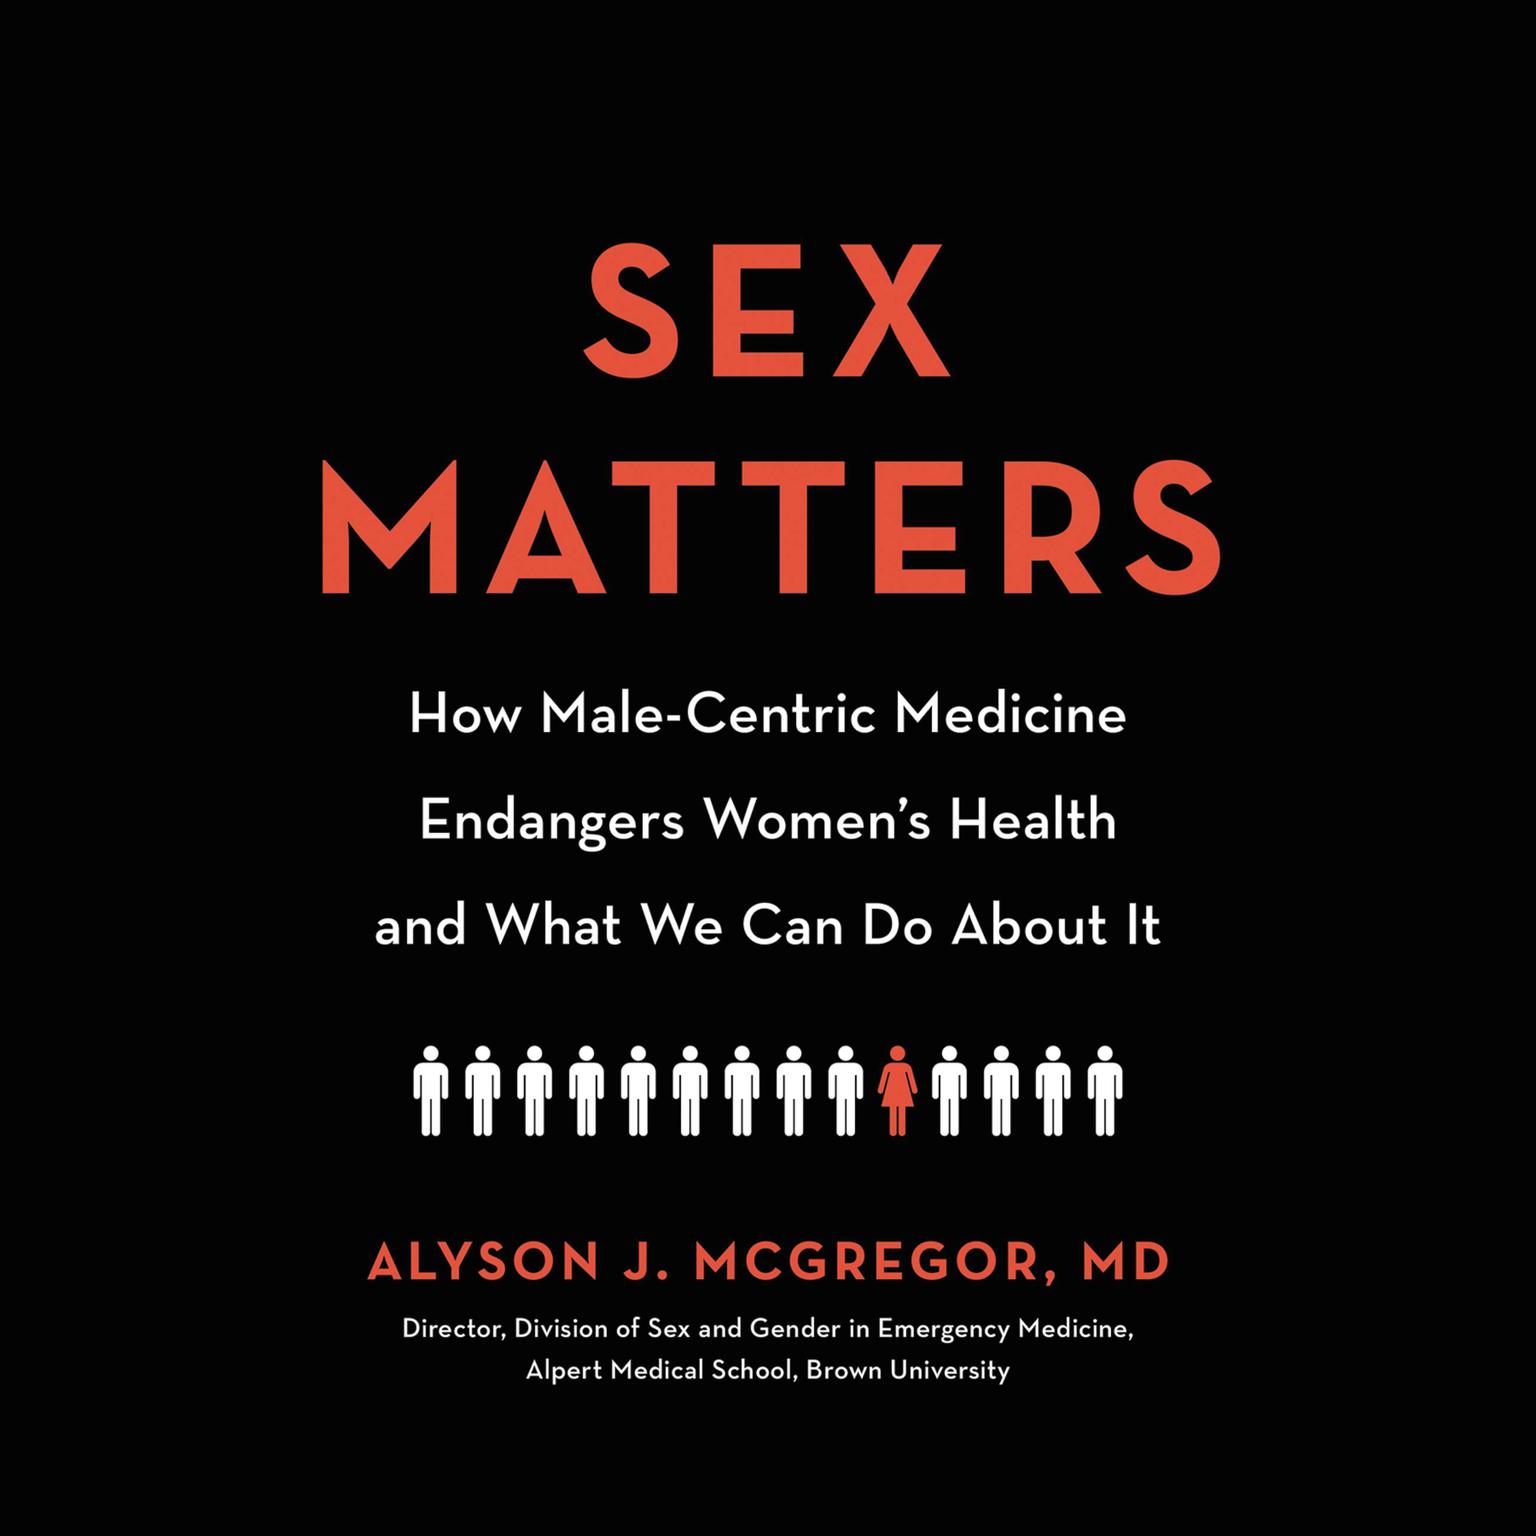 Sex Matters: How Male-Centric Medicine Endangers Womens Health and What We Can Do About It Audiobook, by Alyson J. McGregor